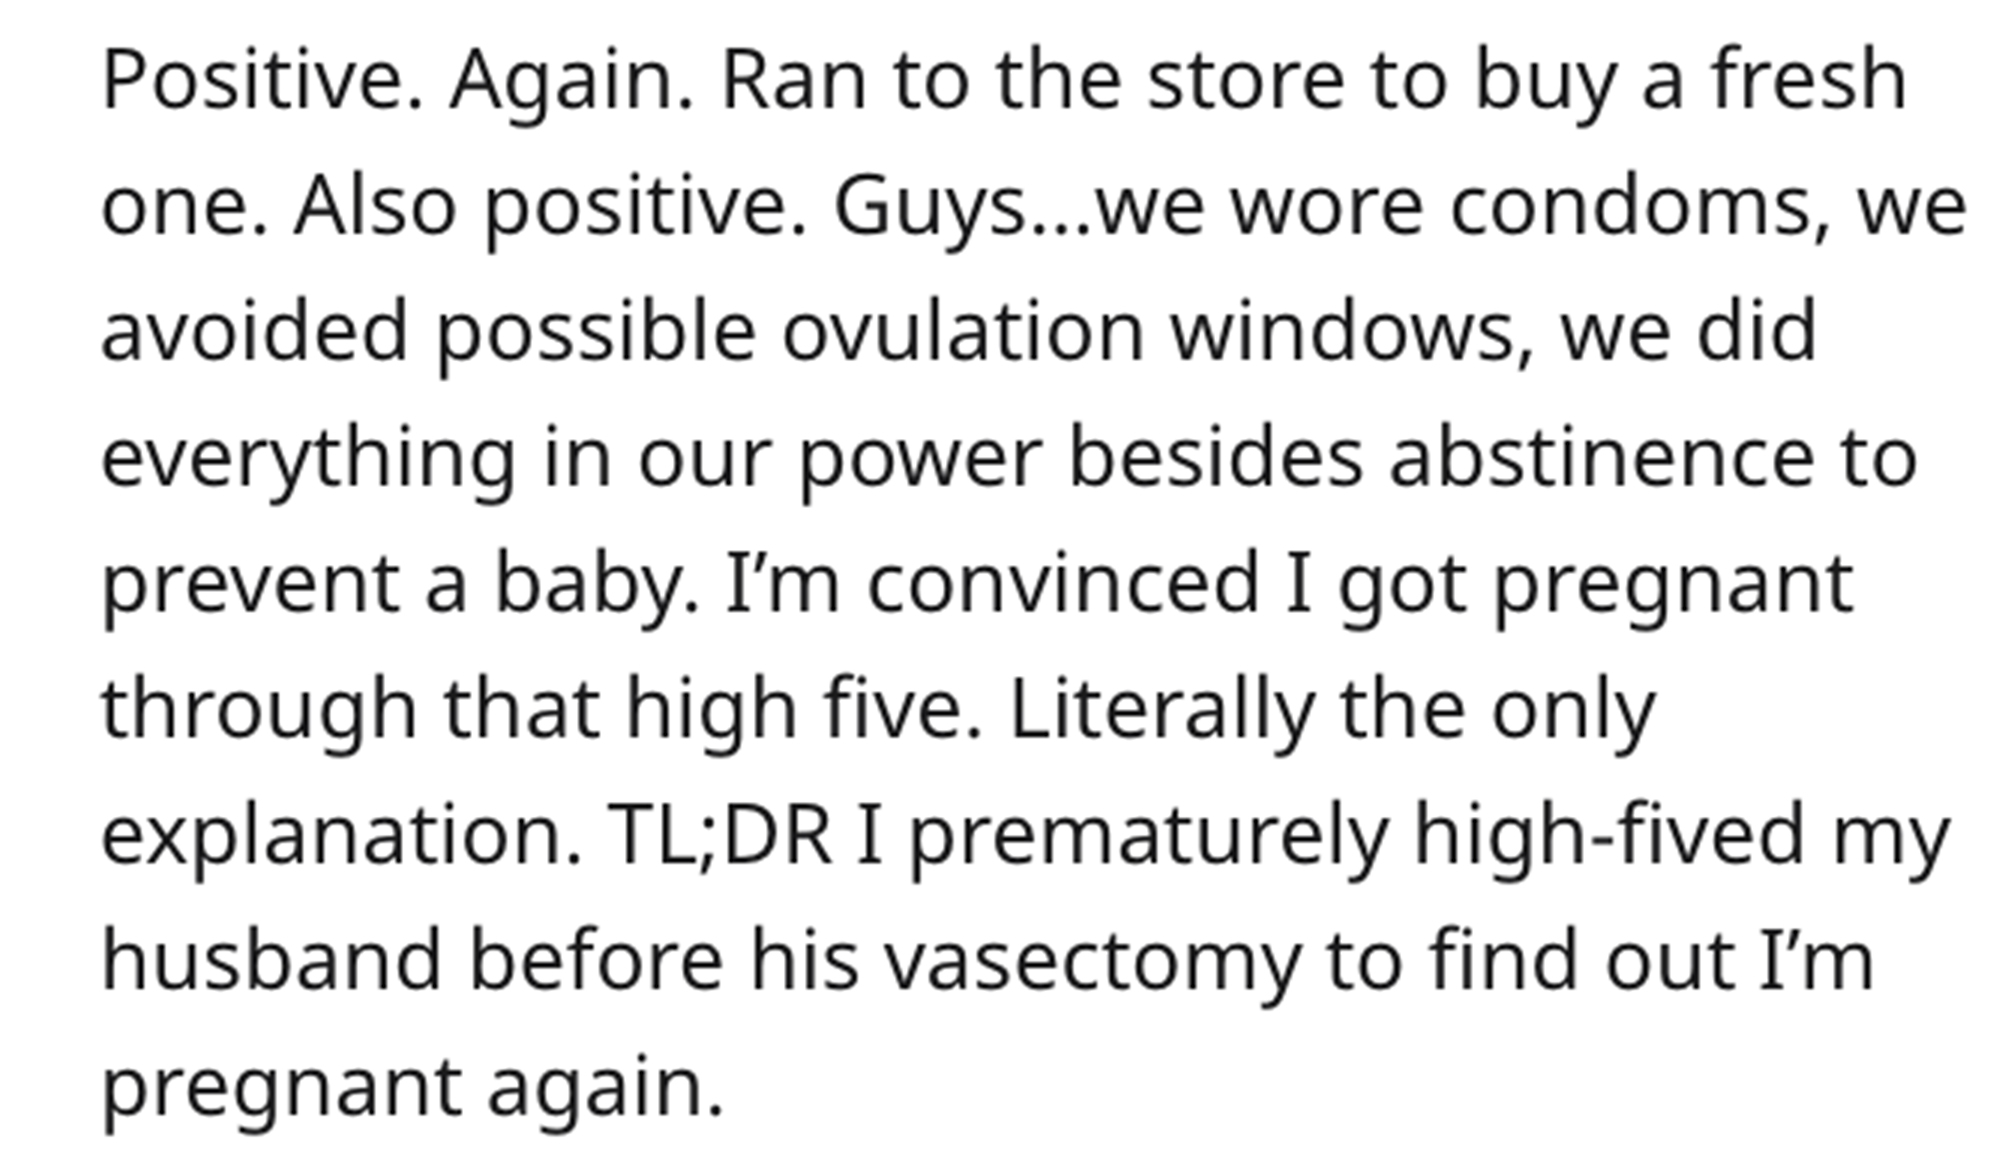 Premature Celebration Story Reddit - handwriting - Positive. Again. Ran to the store to buy a fresh one. Also positive. Guys...we wore condoms, we avoided possible ovulation windows, we did everything in our power besides abstinence to prevent a baby. I'm